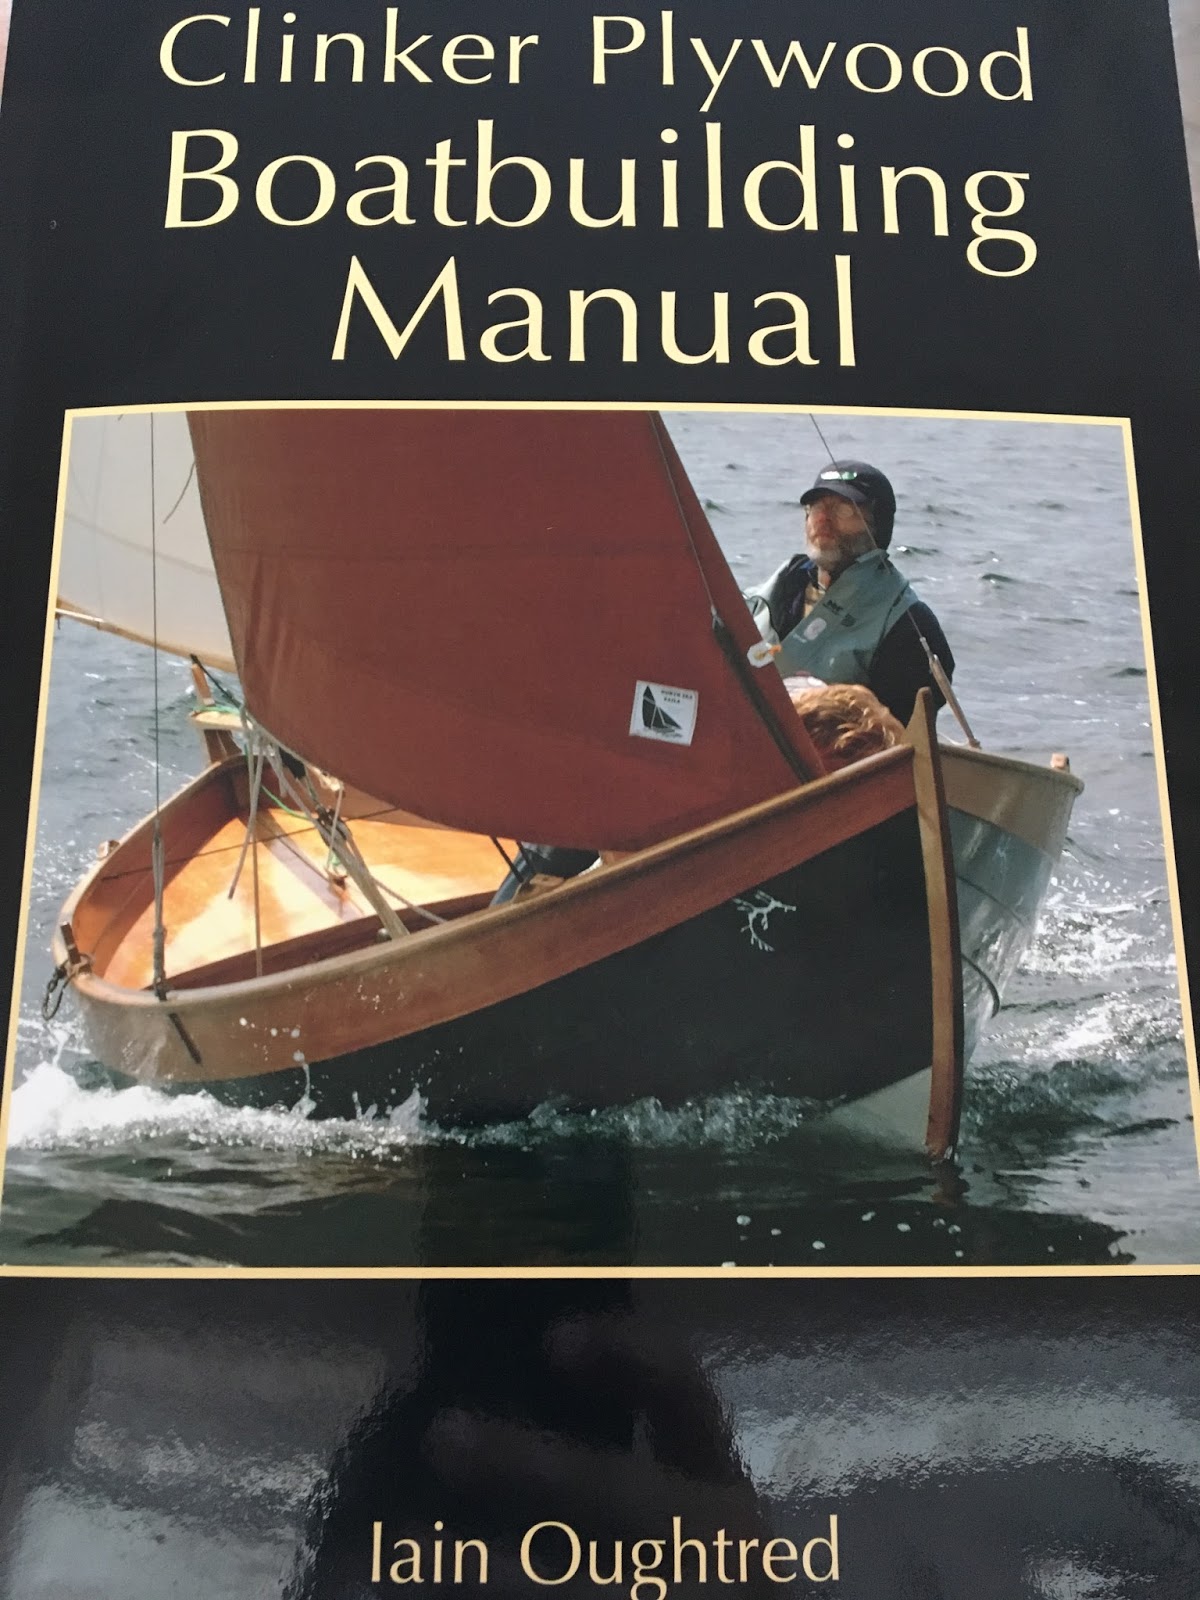 Small Boat Restoration: Clinker Plywood Boatbuilding Manual Oughtred 2004